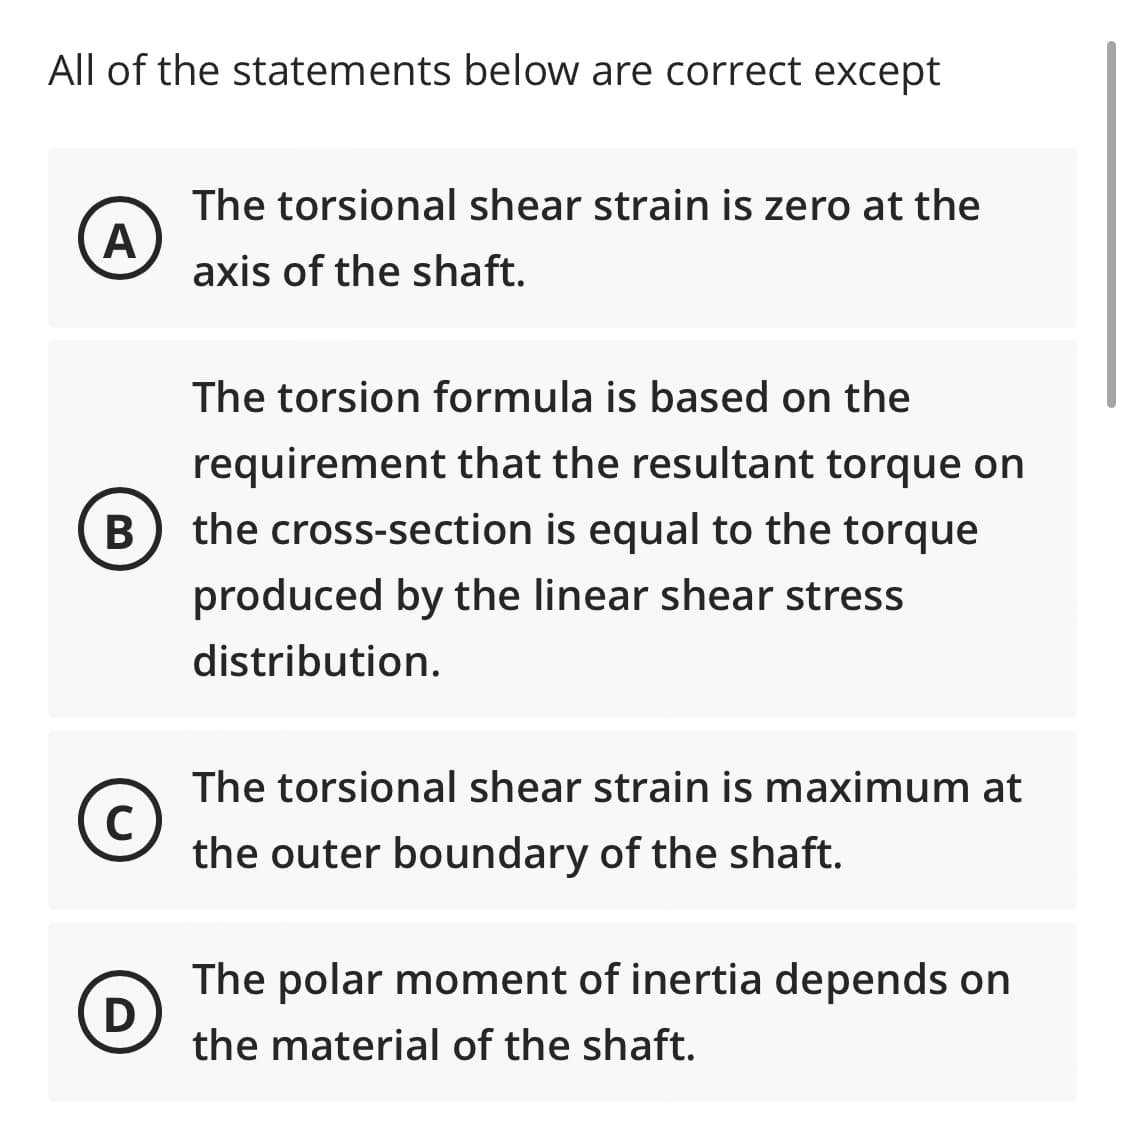 All of the statements below are correct except
A
The torsional shear strain is zero at the
axis of the shaft.
The torsion formula is based on the
requirement that the resultant torque on
the cross-section is equal to the torque
produced by the linear shear stress
distribution.
The torsional shear strain is maximum at
the outer boundary of the shaft.
The polar moment of inertia depends on
the material of the shaft.
B
C
D